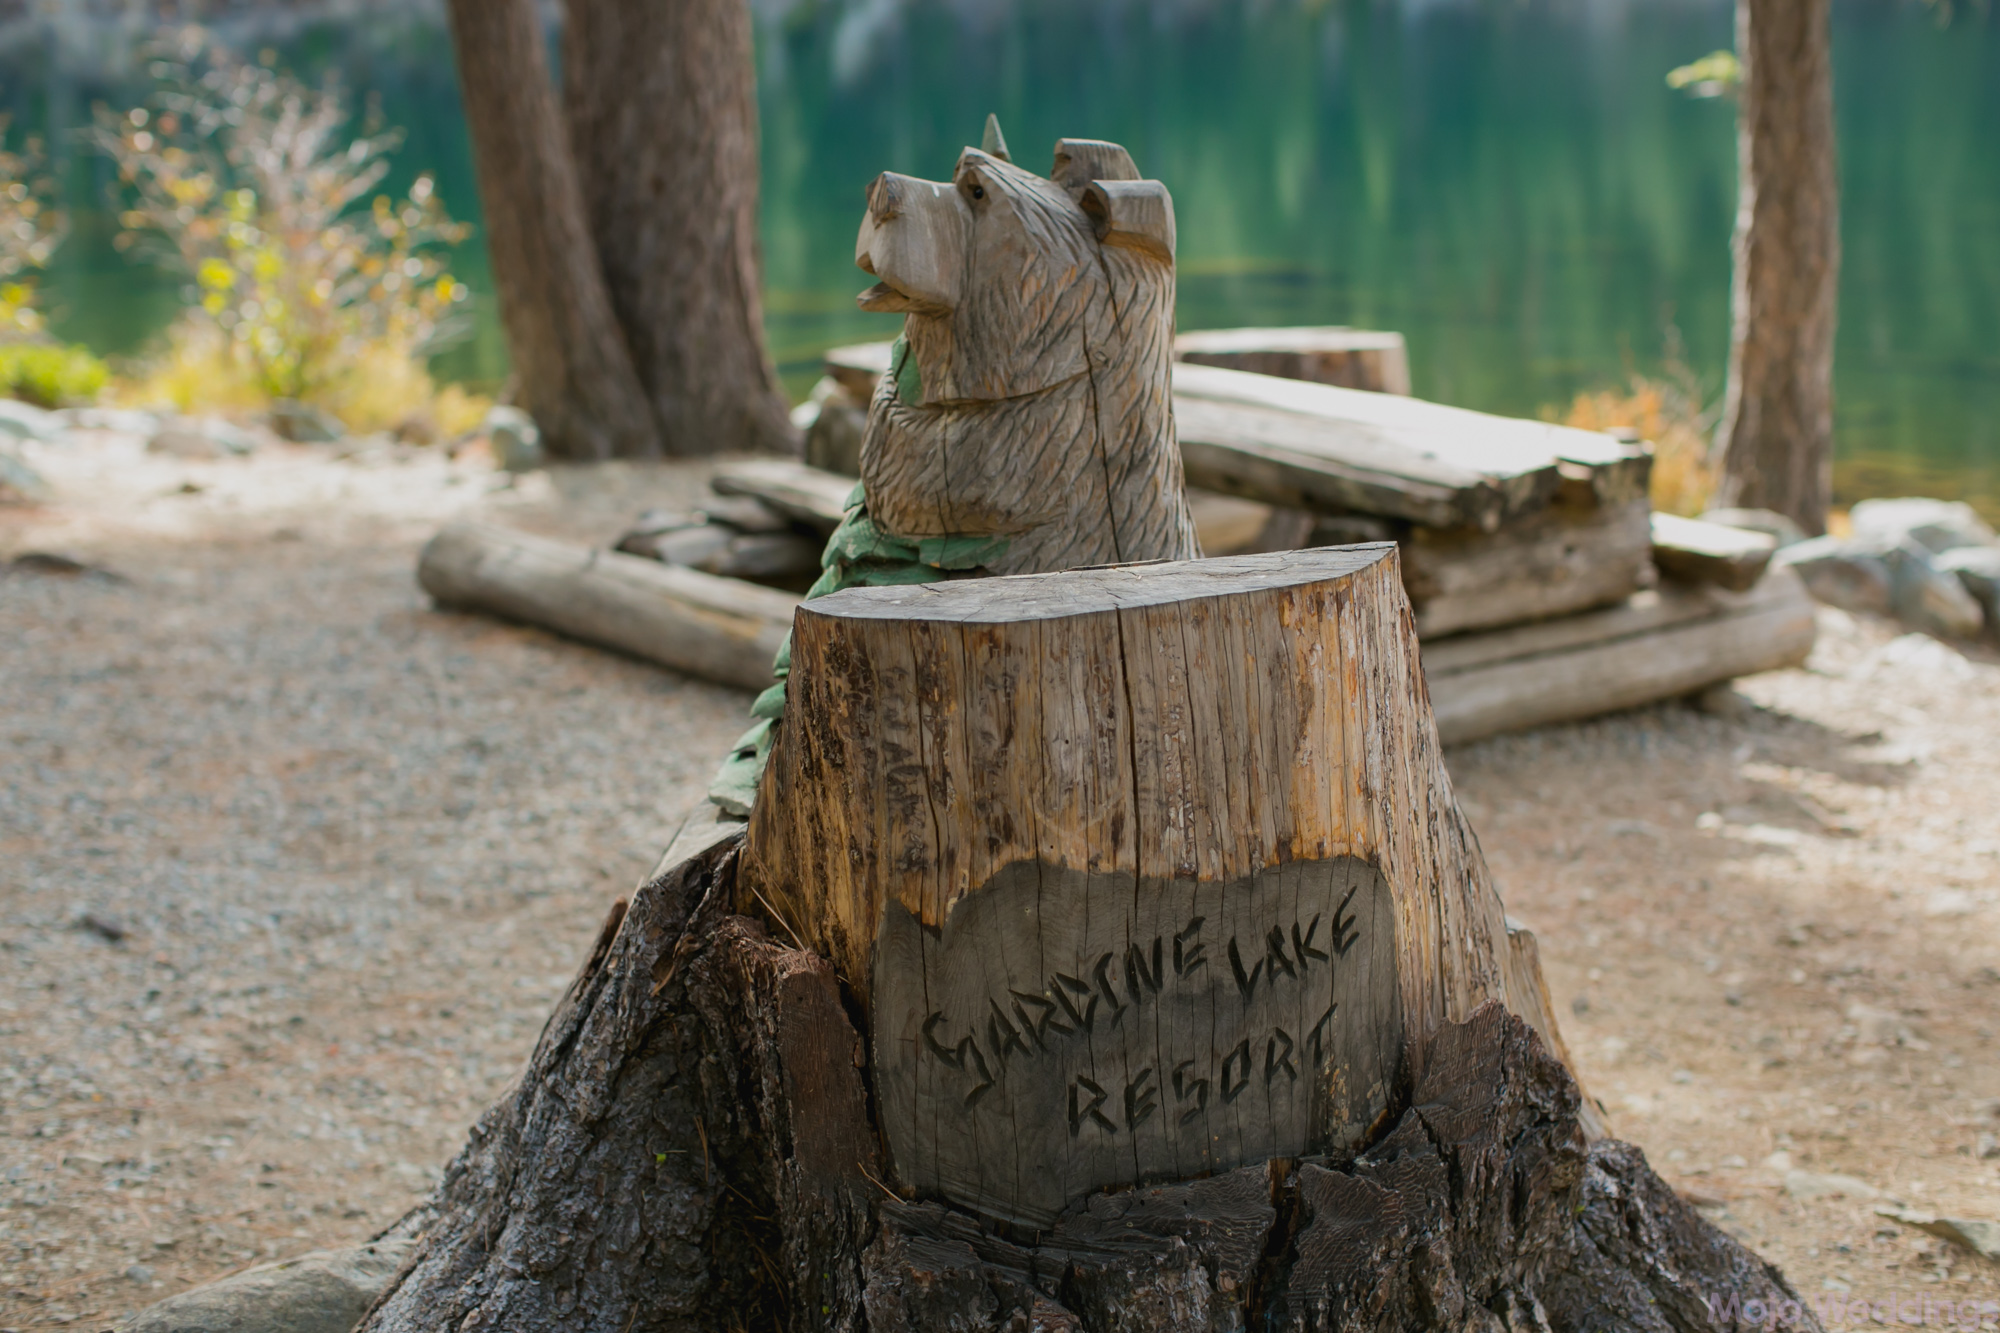 A wood carving of a bear and a sign carved in to a stump saying Sardine Lake Resort.